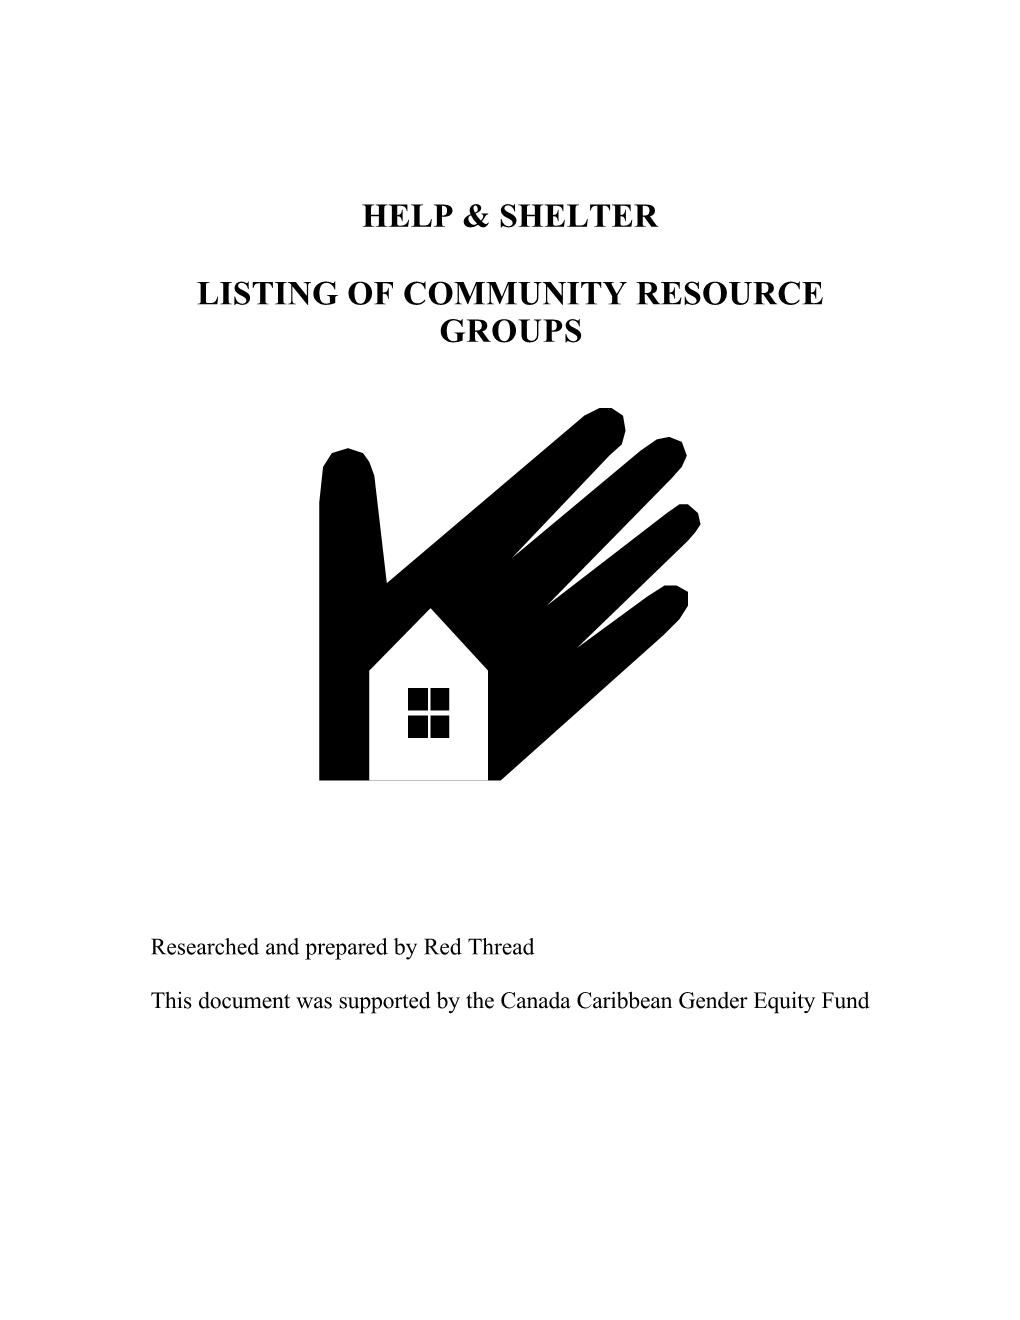 Help & Shelter Listing of Community Resource Groups